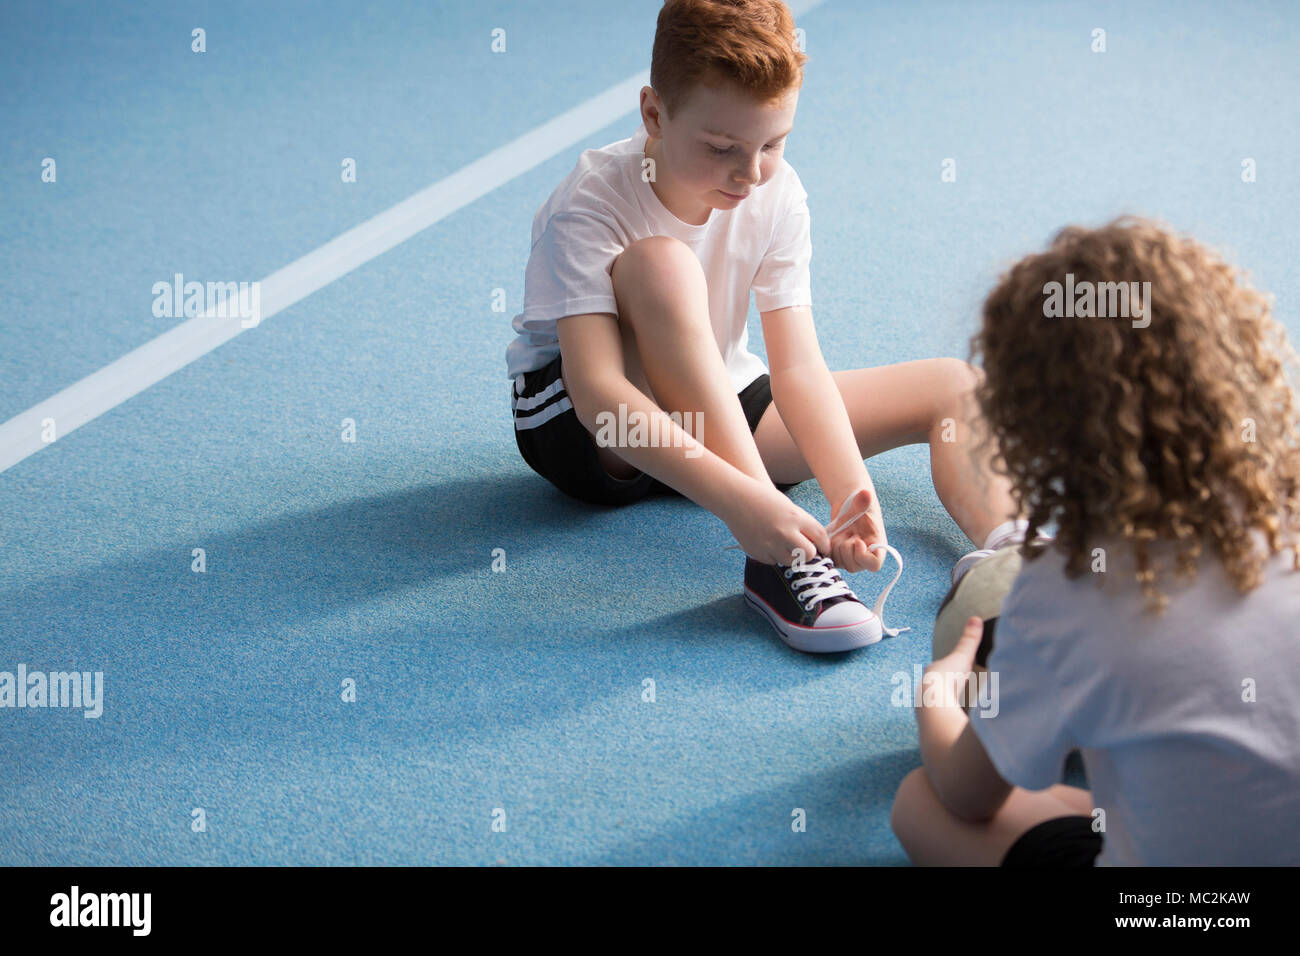 Young boy sitting on a blue floor and tying the shoelaces before physical education classes Stock Photo